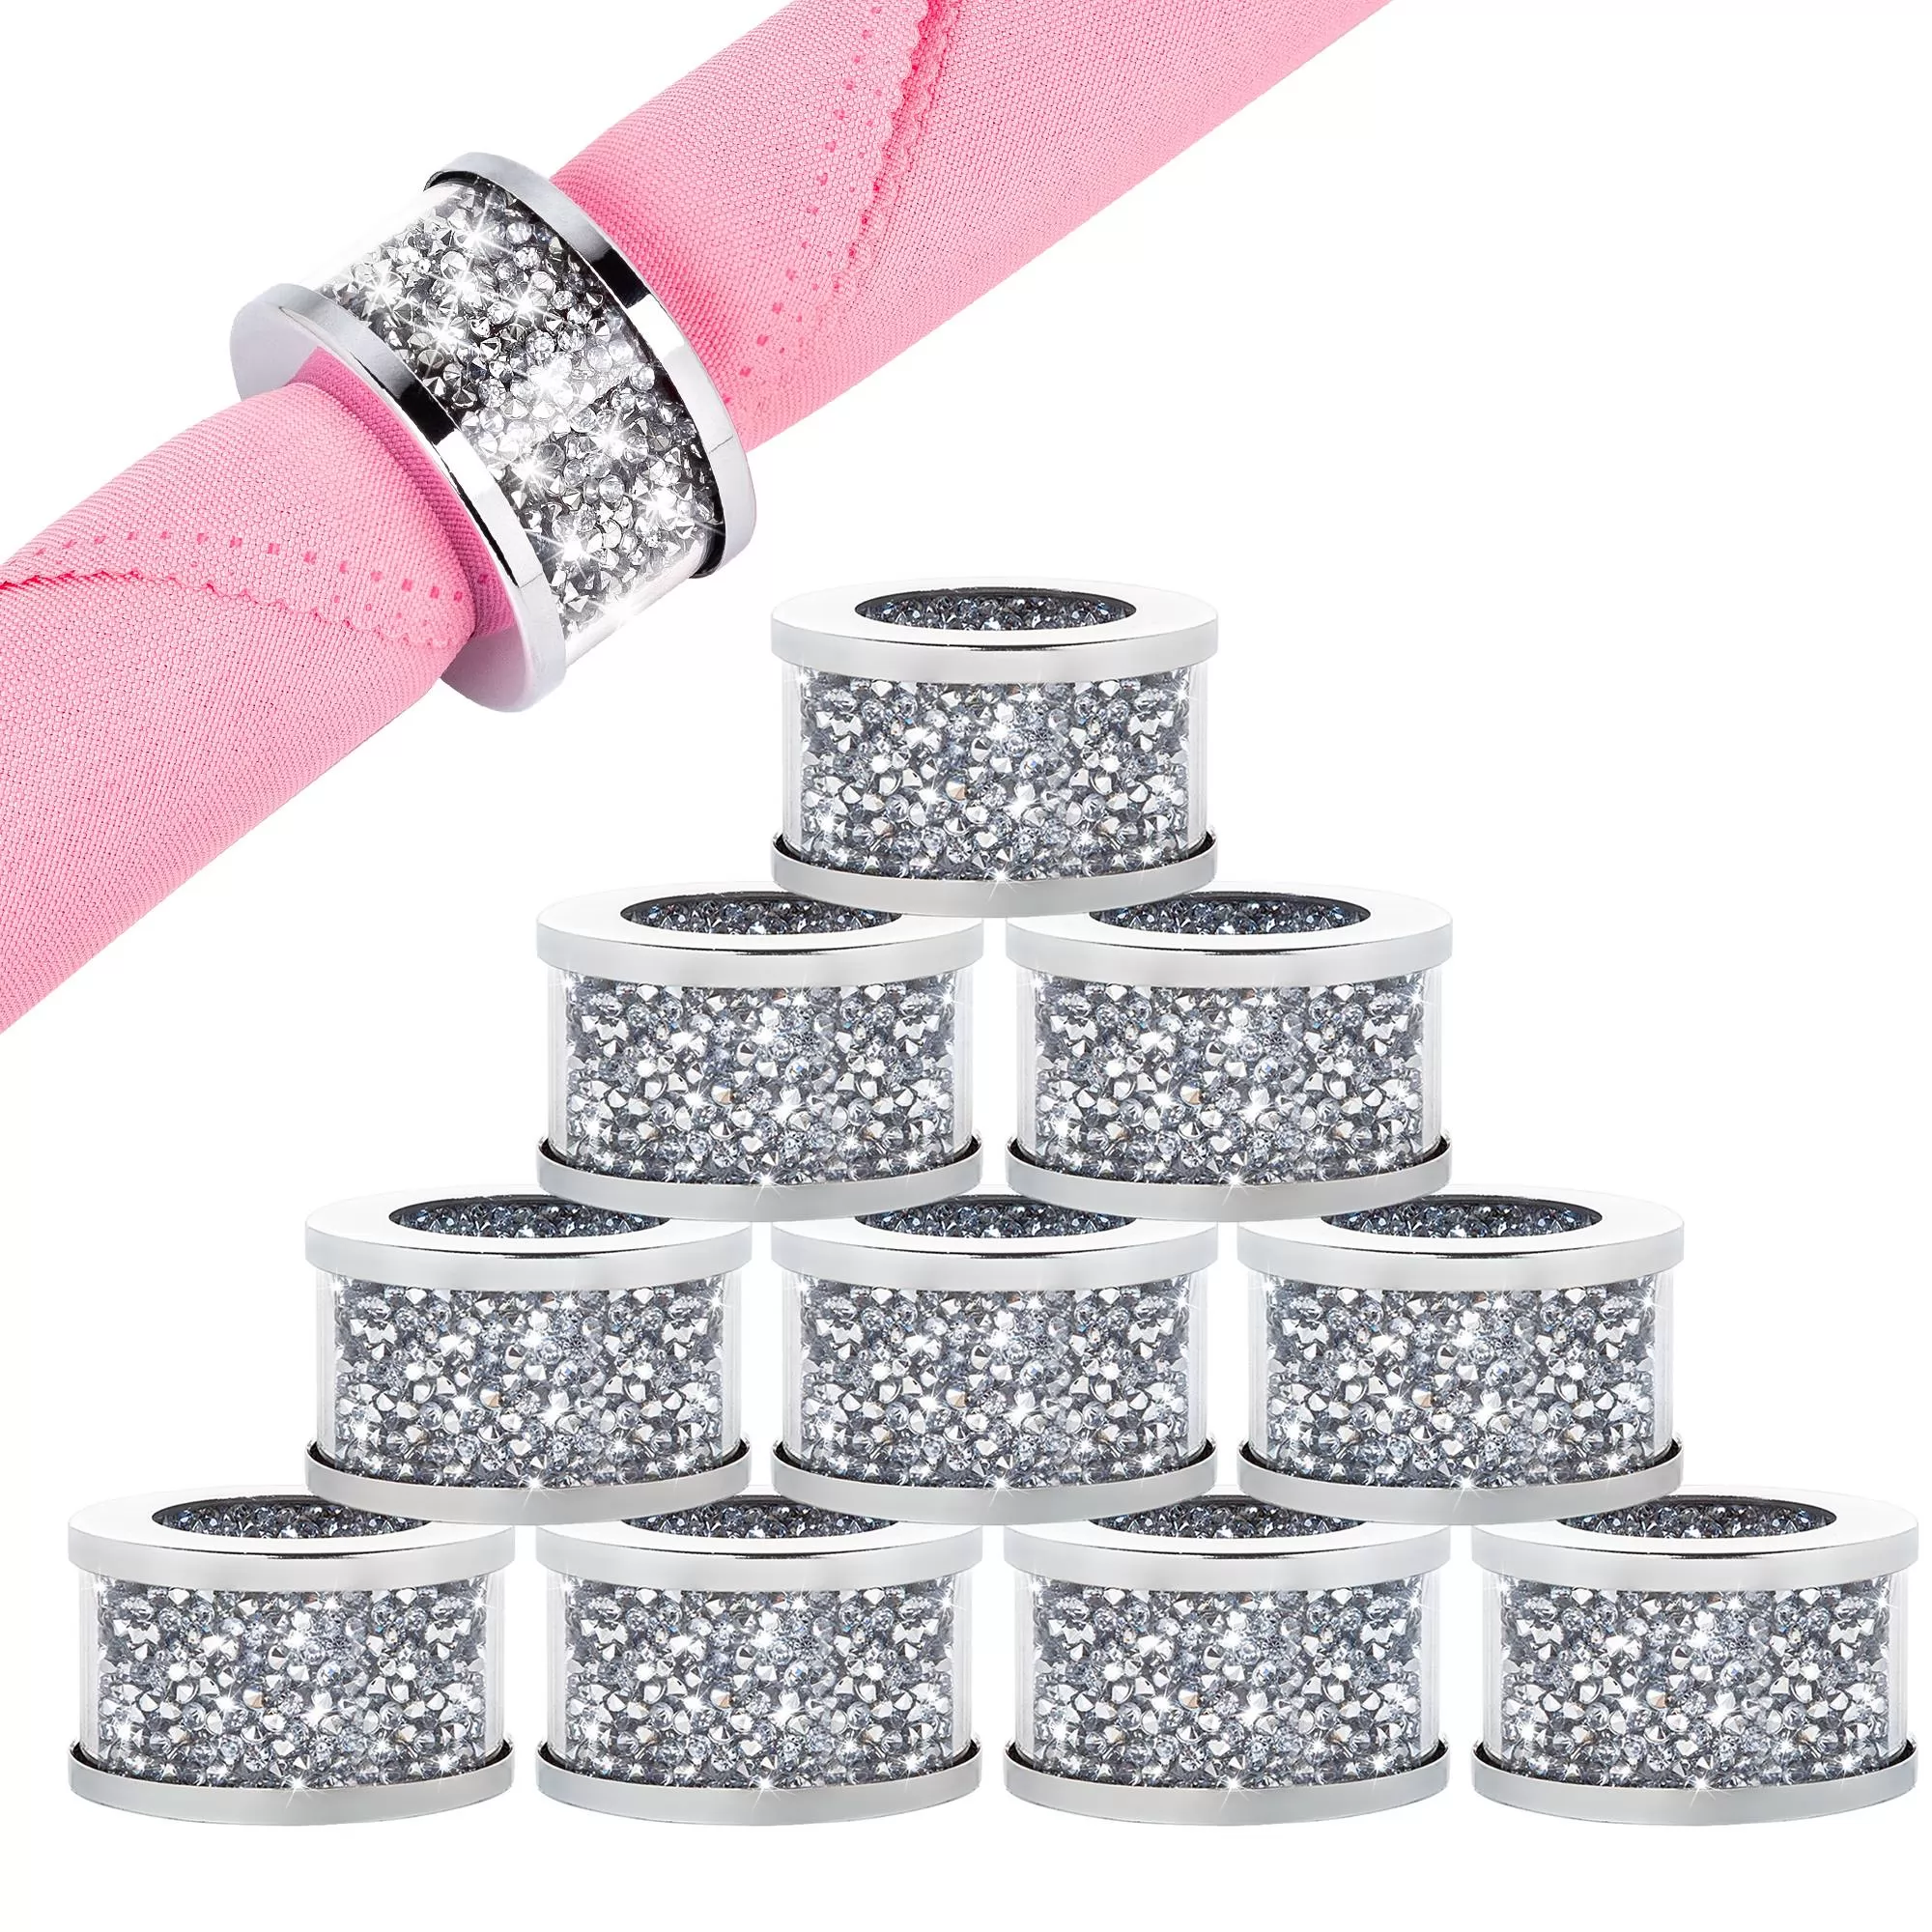 SHYFOY Napkin Rings Silver Set of 10, Bling Cloth Holder Full of Crushed Diamond for Dinner Party, Wedding, Easter, Holiday, Christmas, Thanksgiving,G